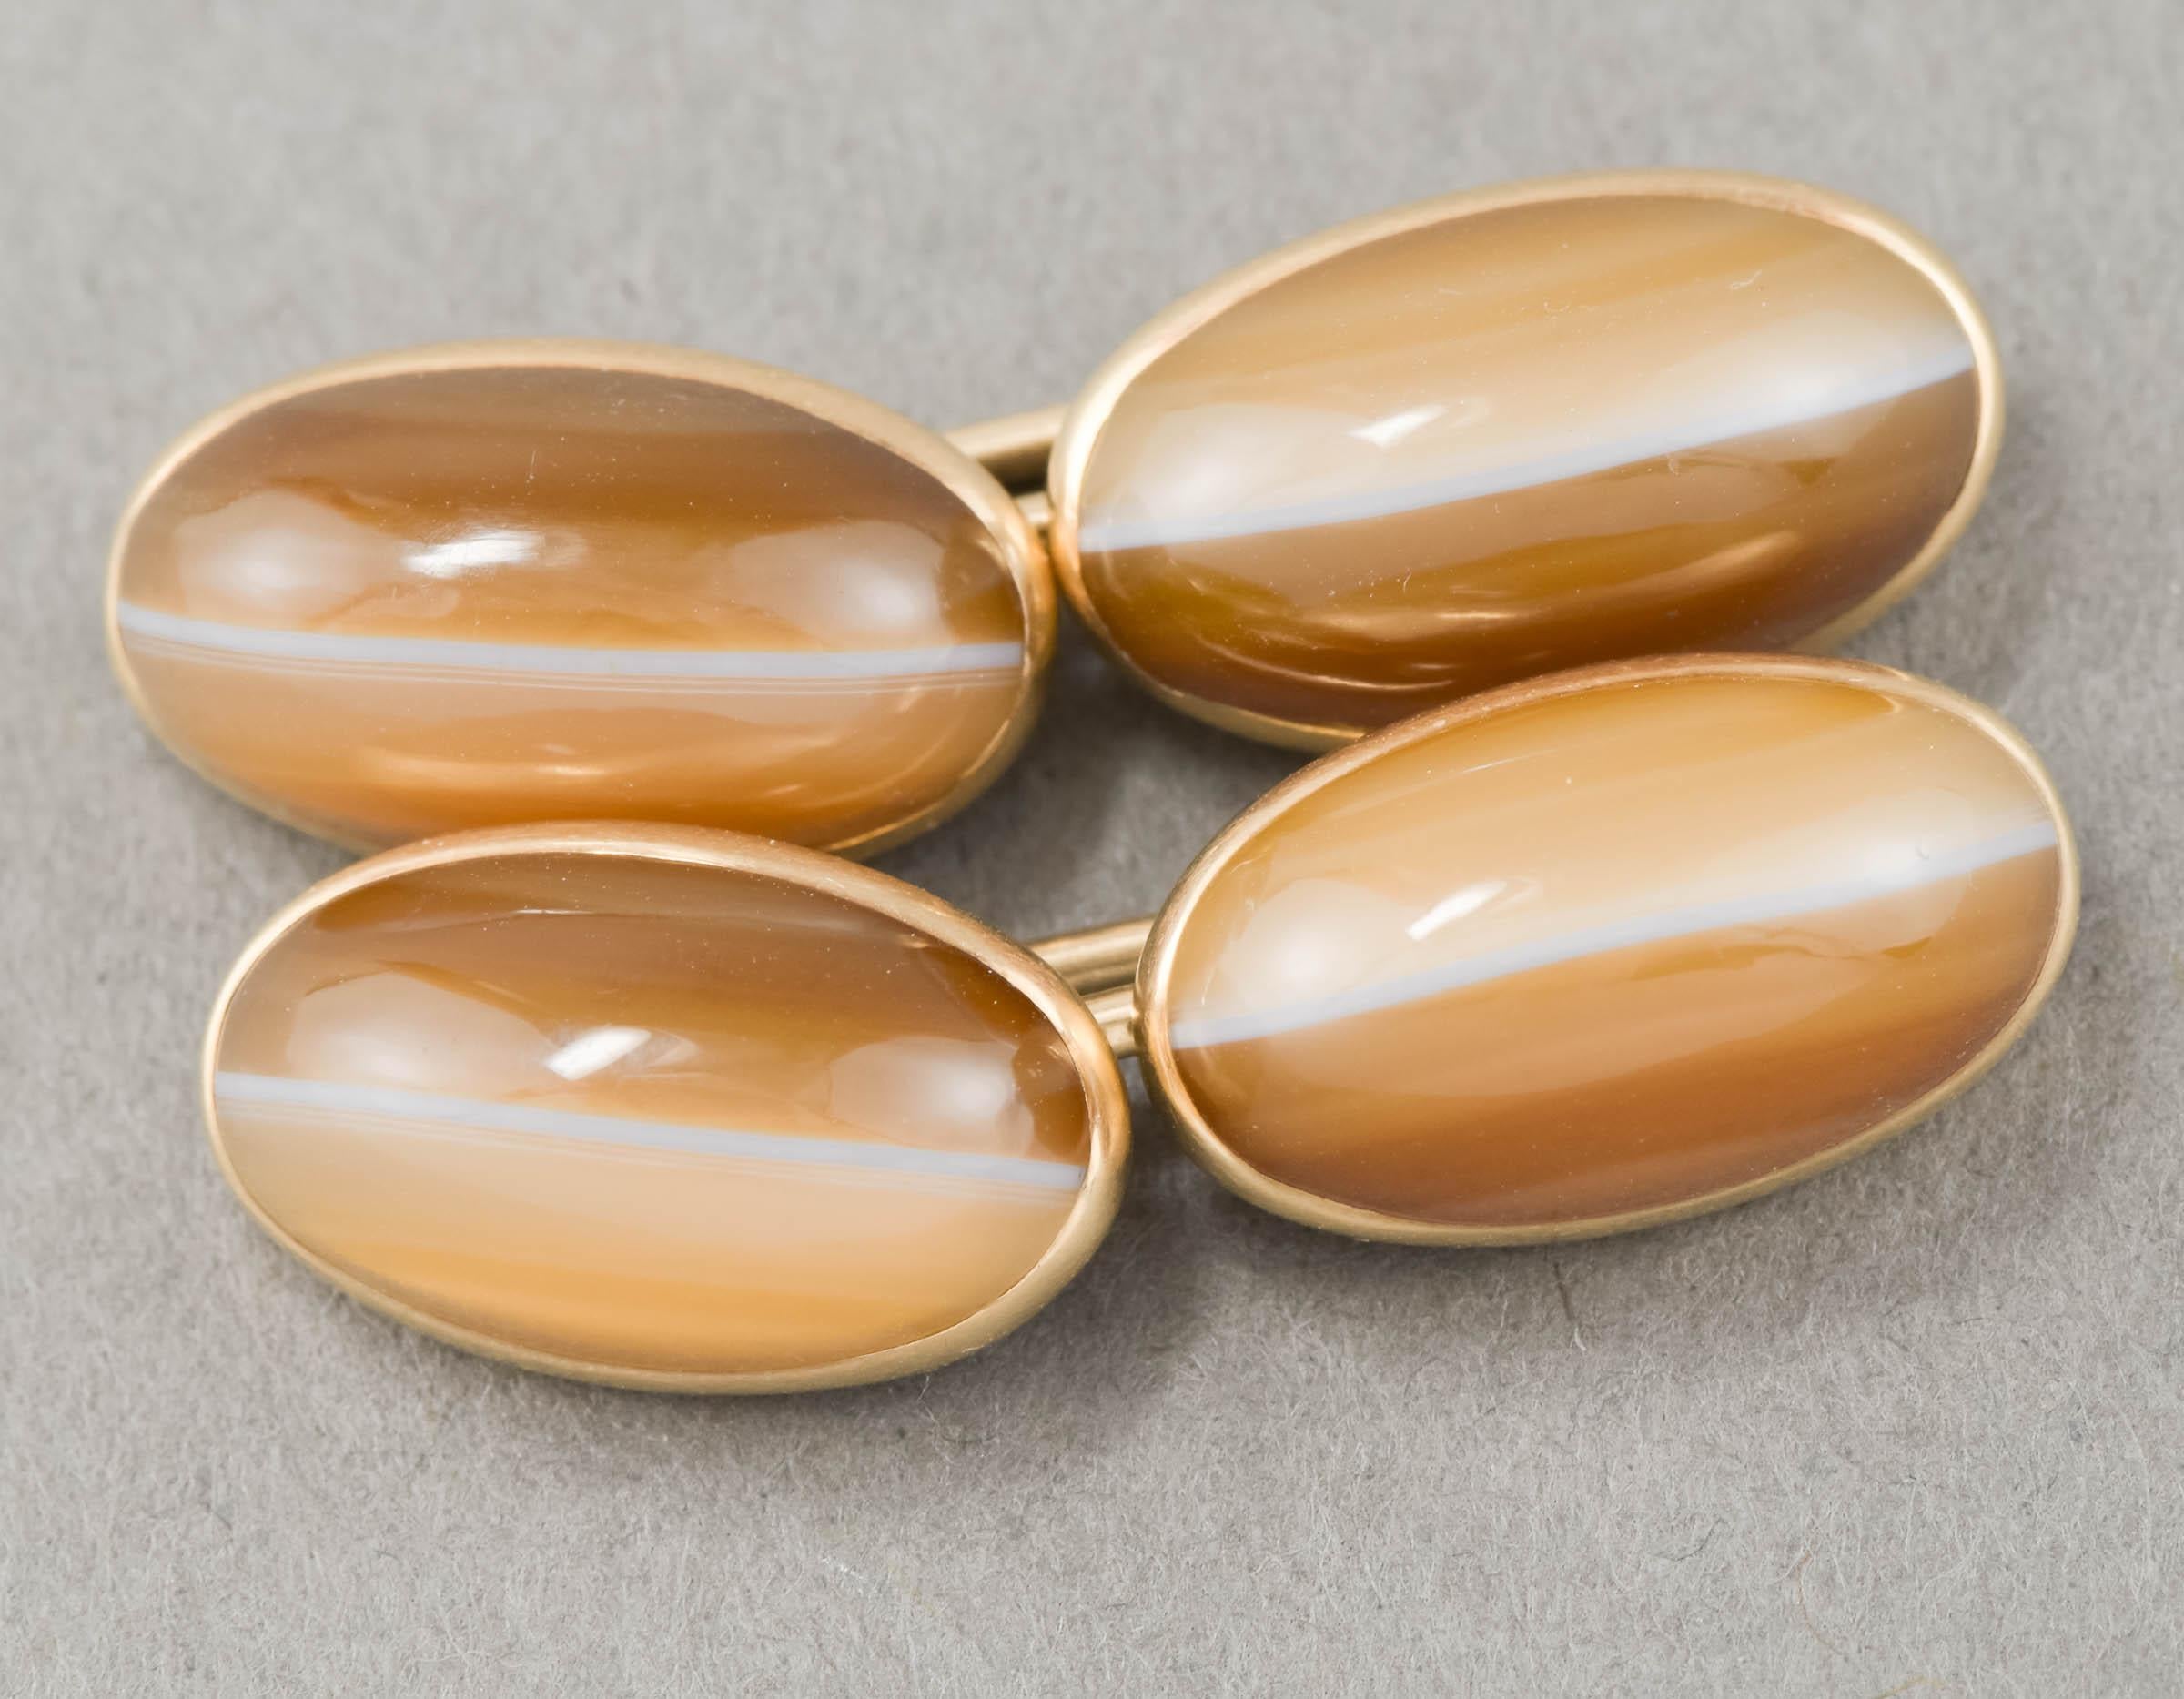 Offered is an elegant and very classic pair of late Victorian 14K gold banded agate cufflinks.

With a total of 4 high dome cabochons in closed back gold settings, the banded agates are far prettier than photos can capture.  They have a warmth and